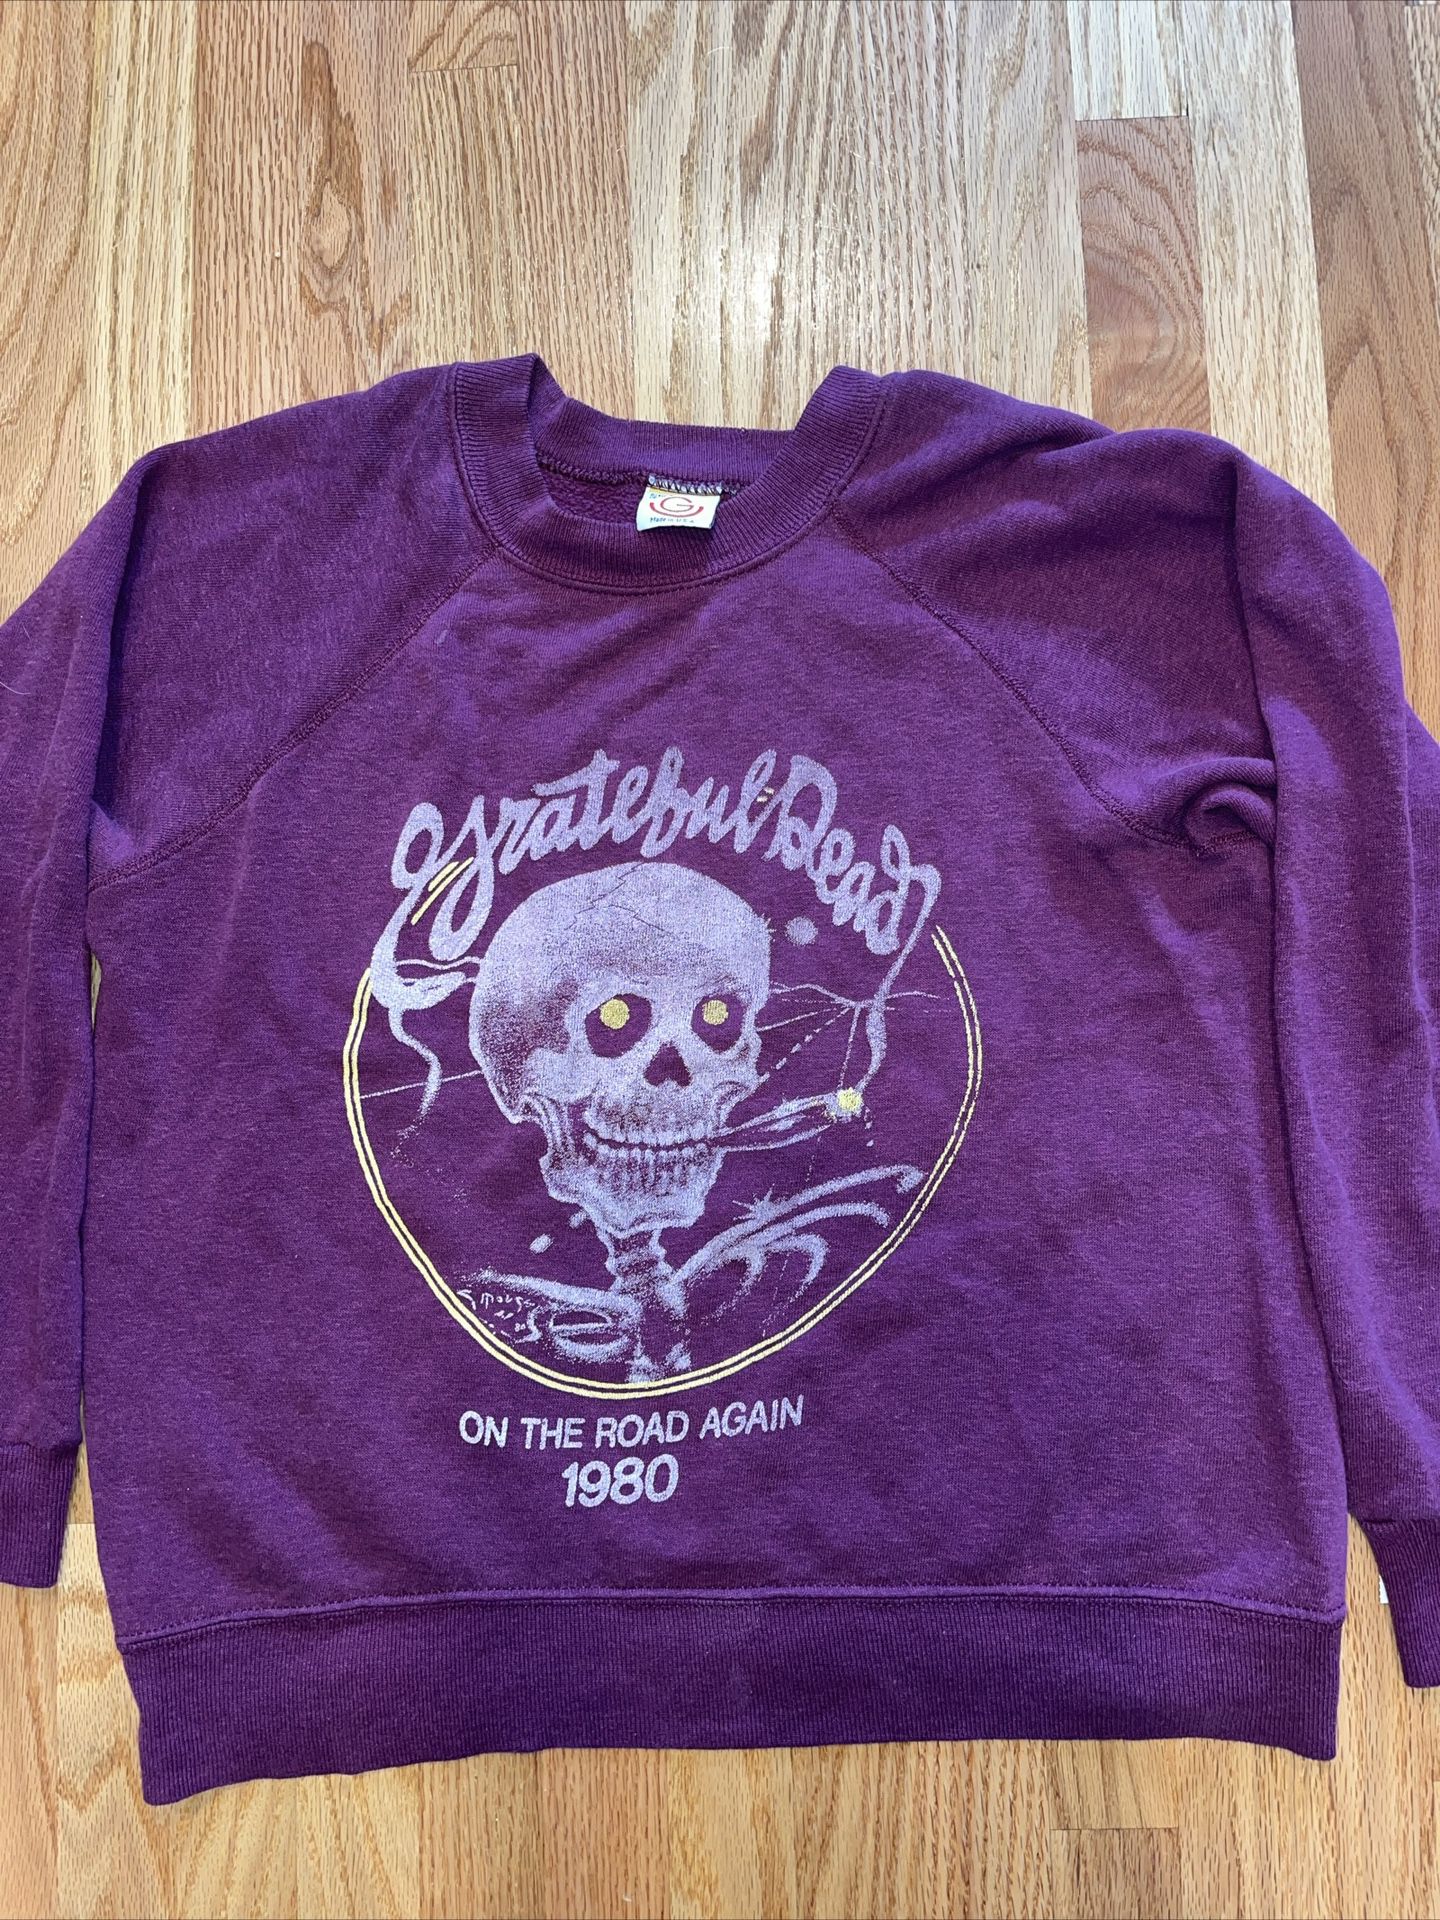 Vintage Grateful Dead Shirt Sweatshirt “On The Road Again 1980” Rare Made In USA